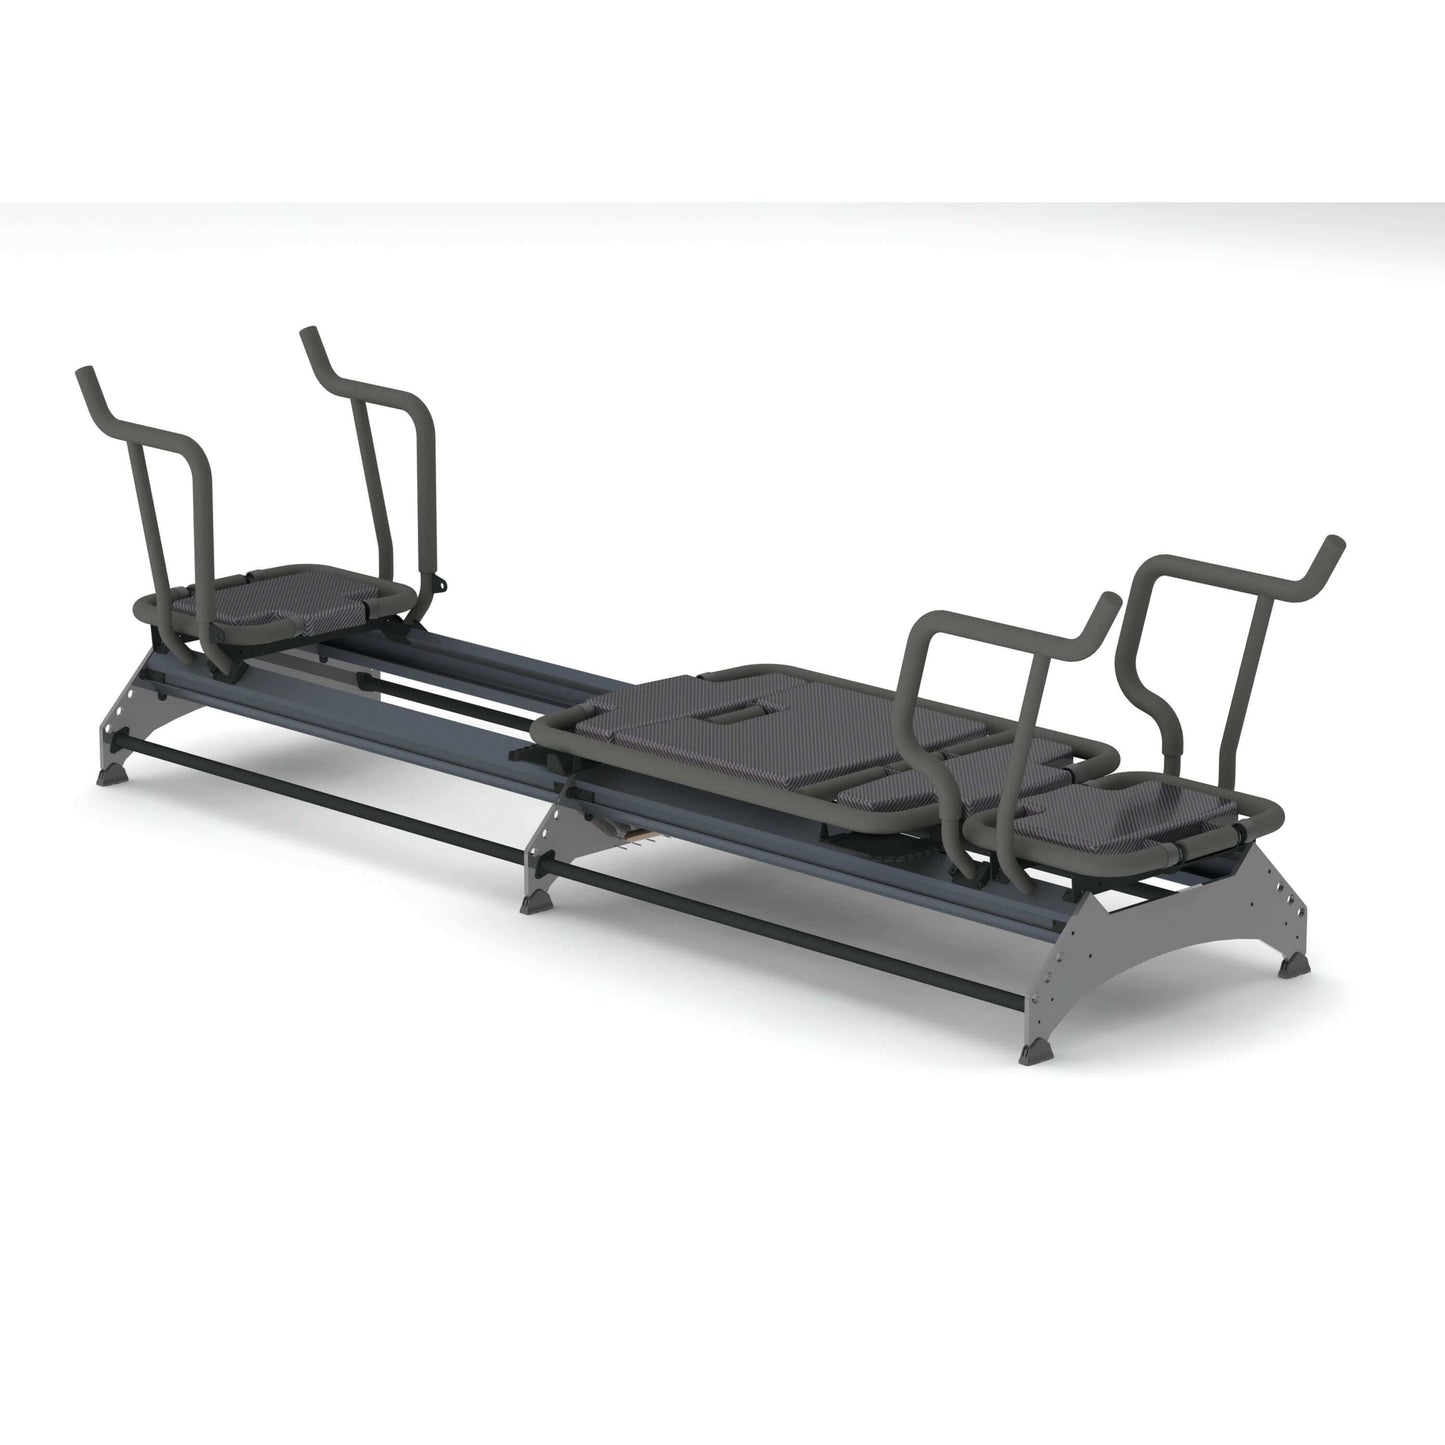  Lagree Fitness Mega Pro Machine by Lagree Fitness sold by Pilates Matters® by BSP LLC